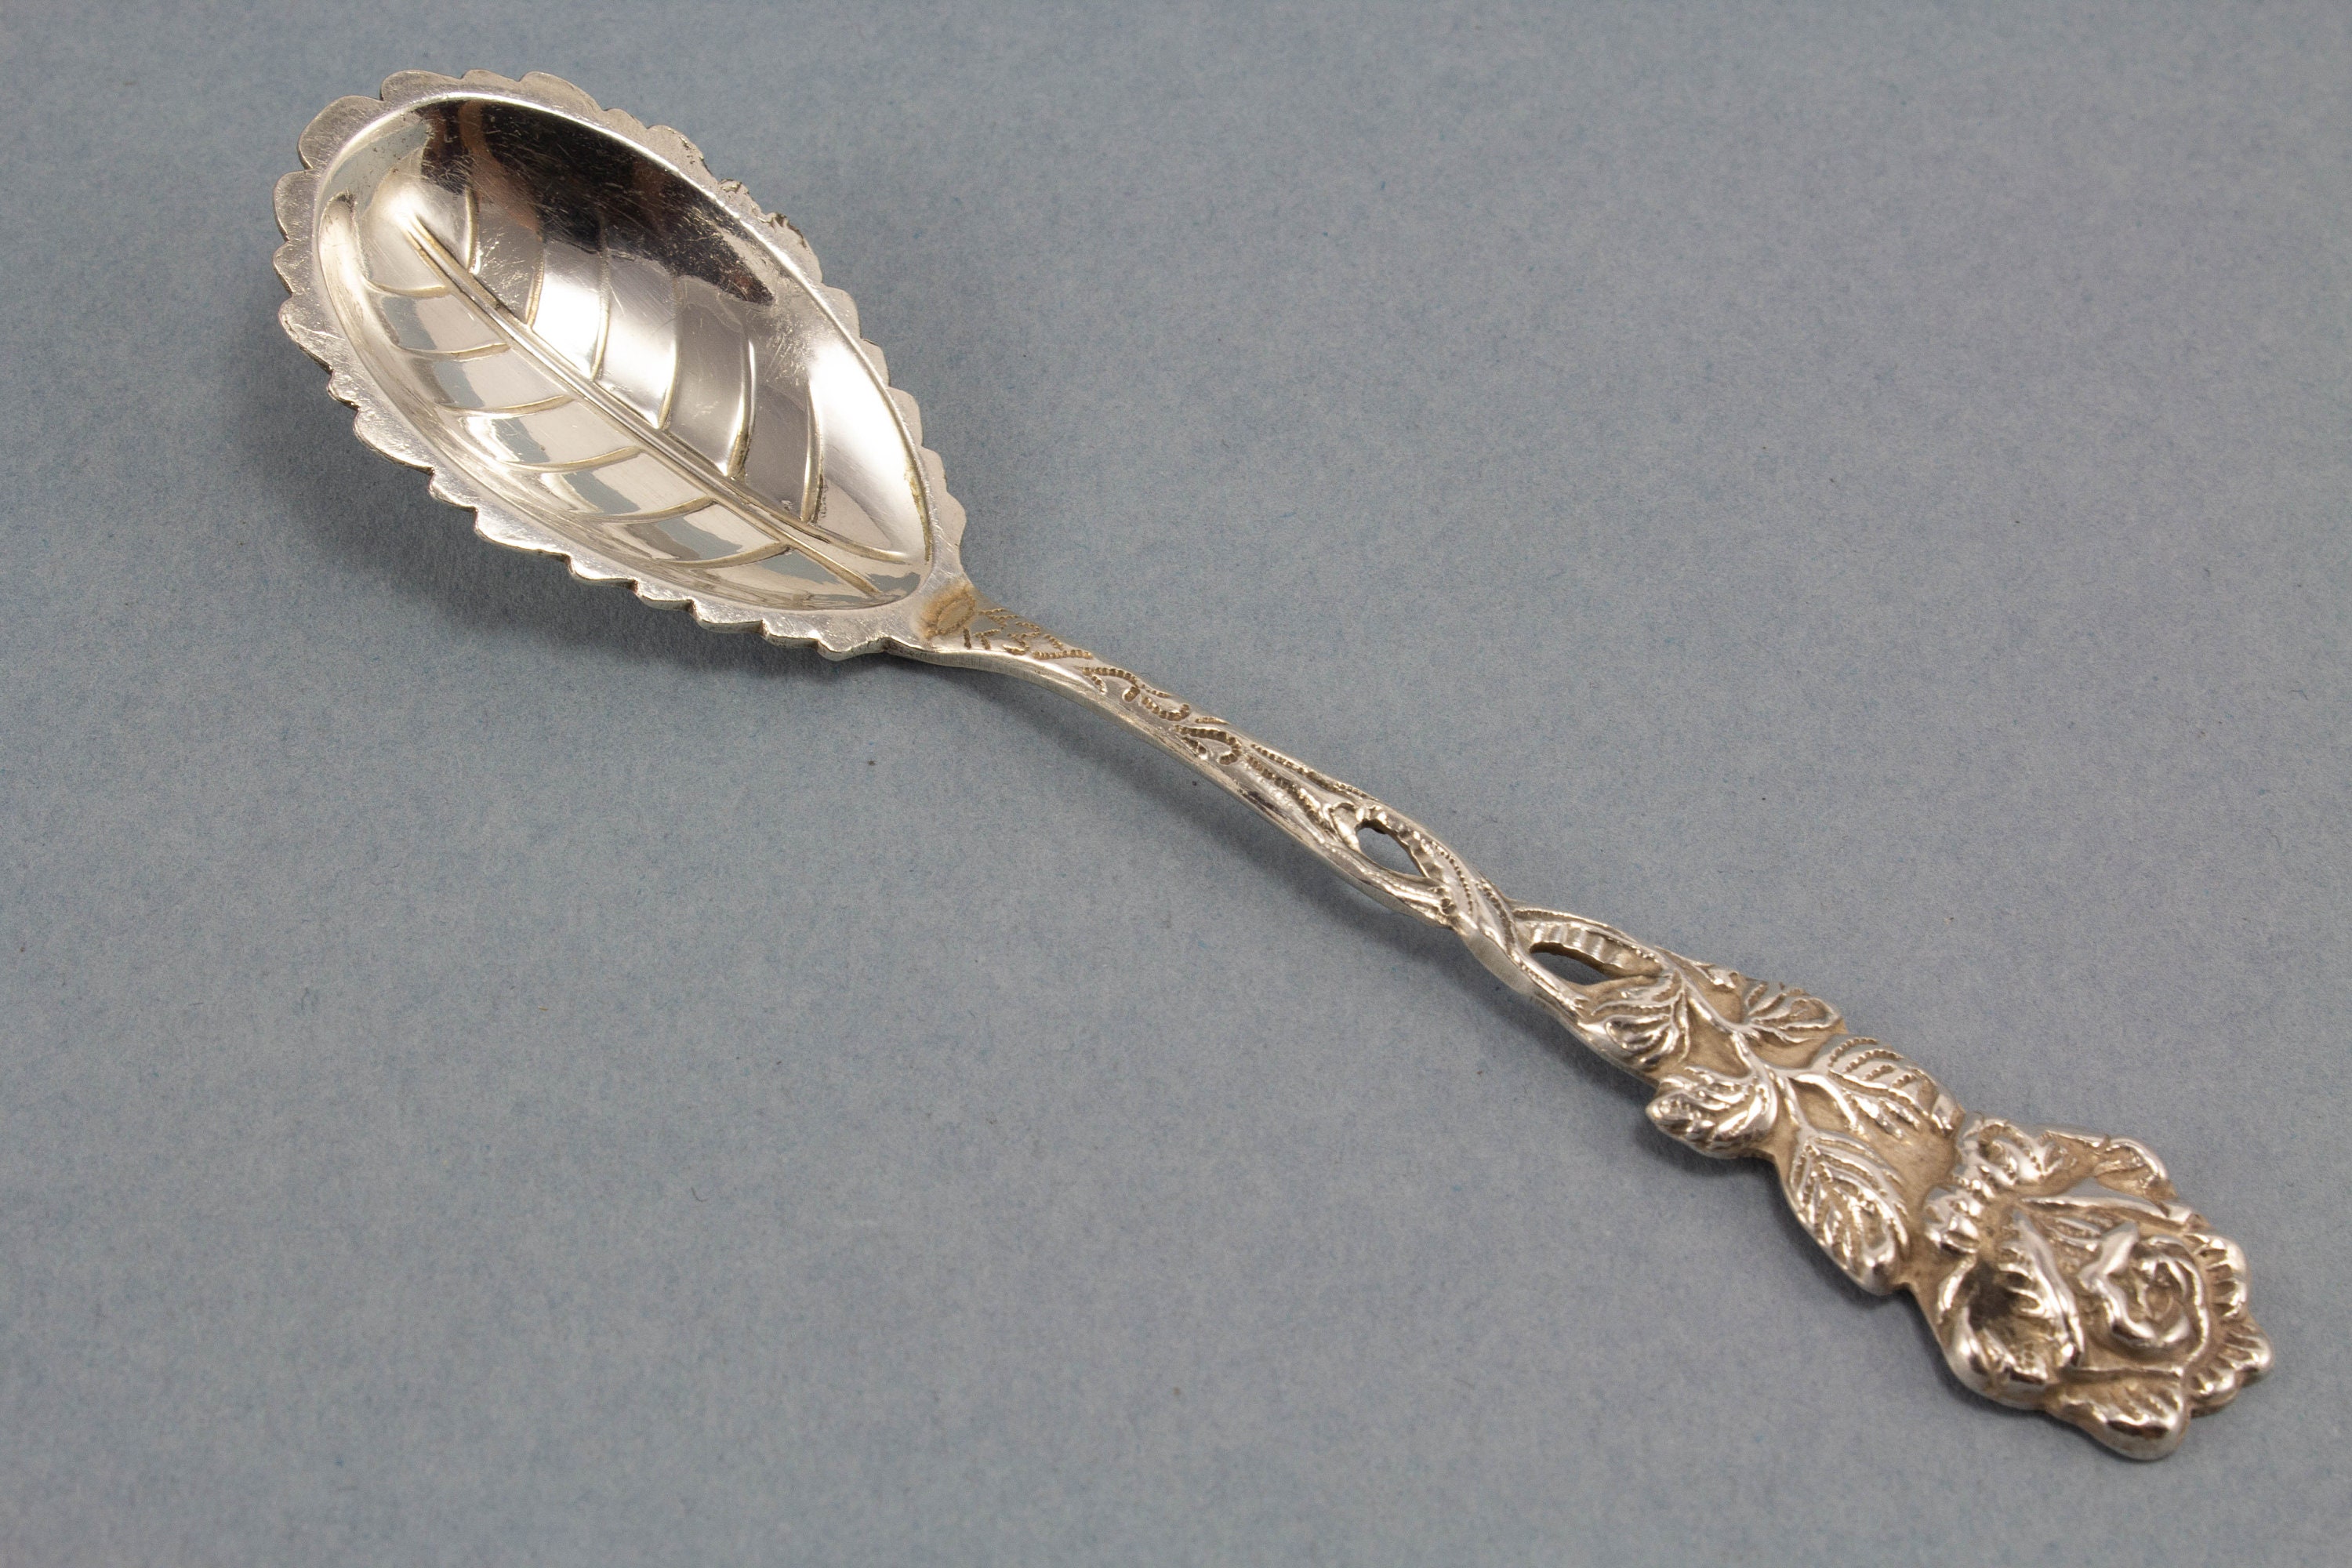 S000007 Sterling Silver Baby Spoon Solid Hallmarked 925 